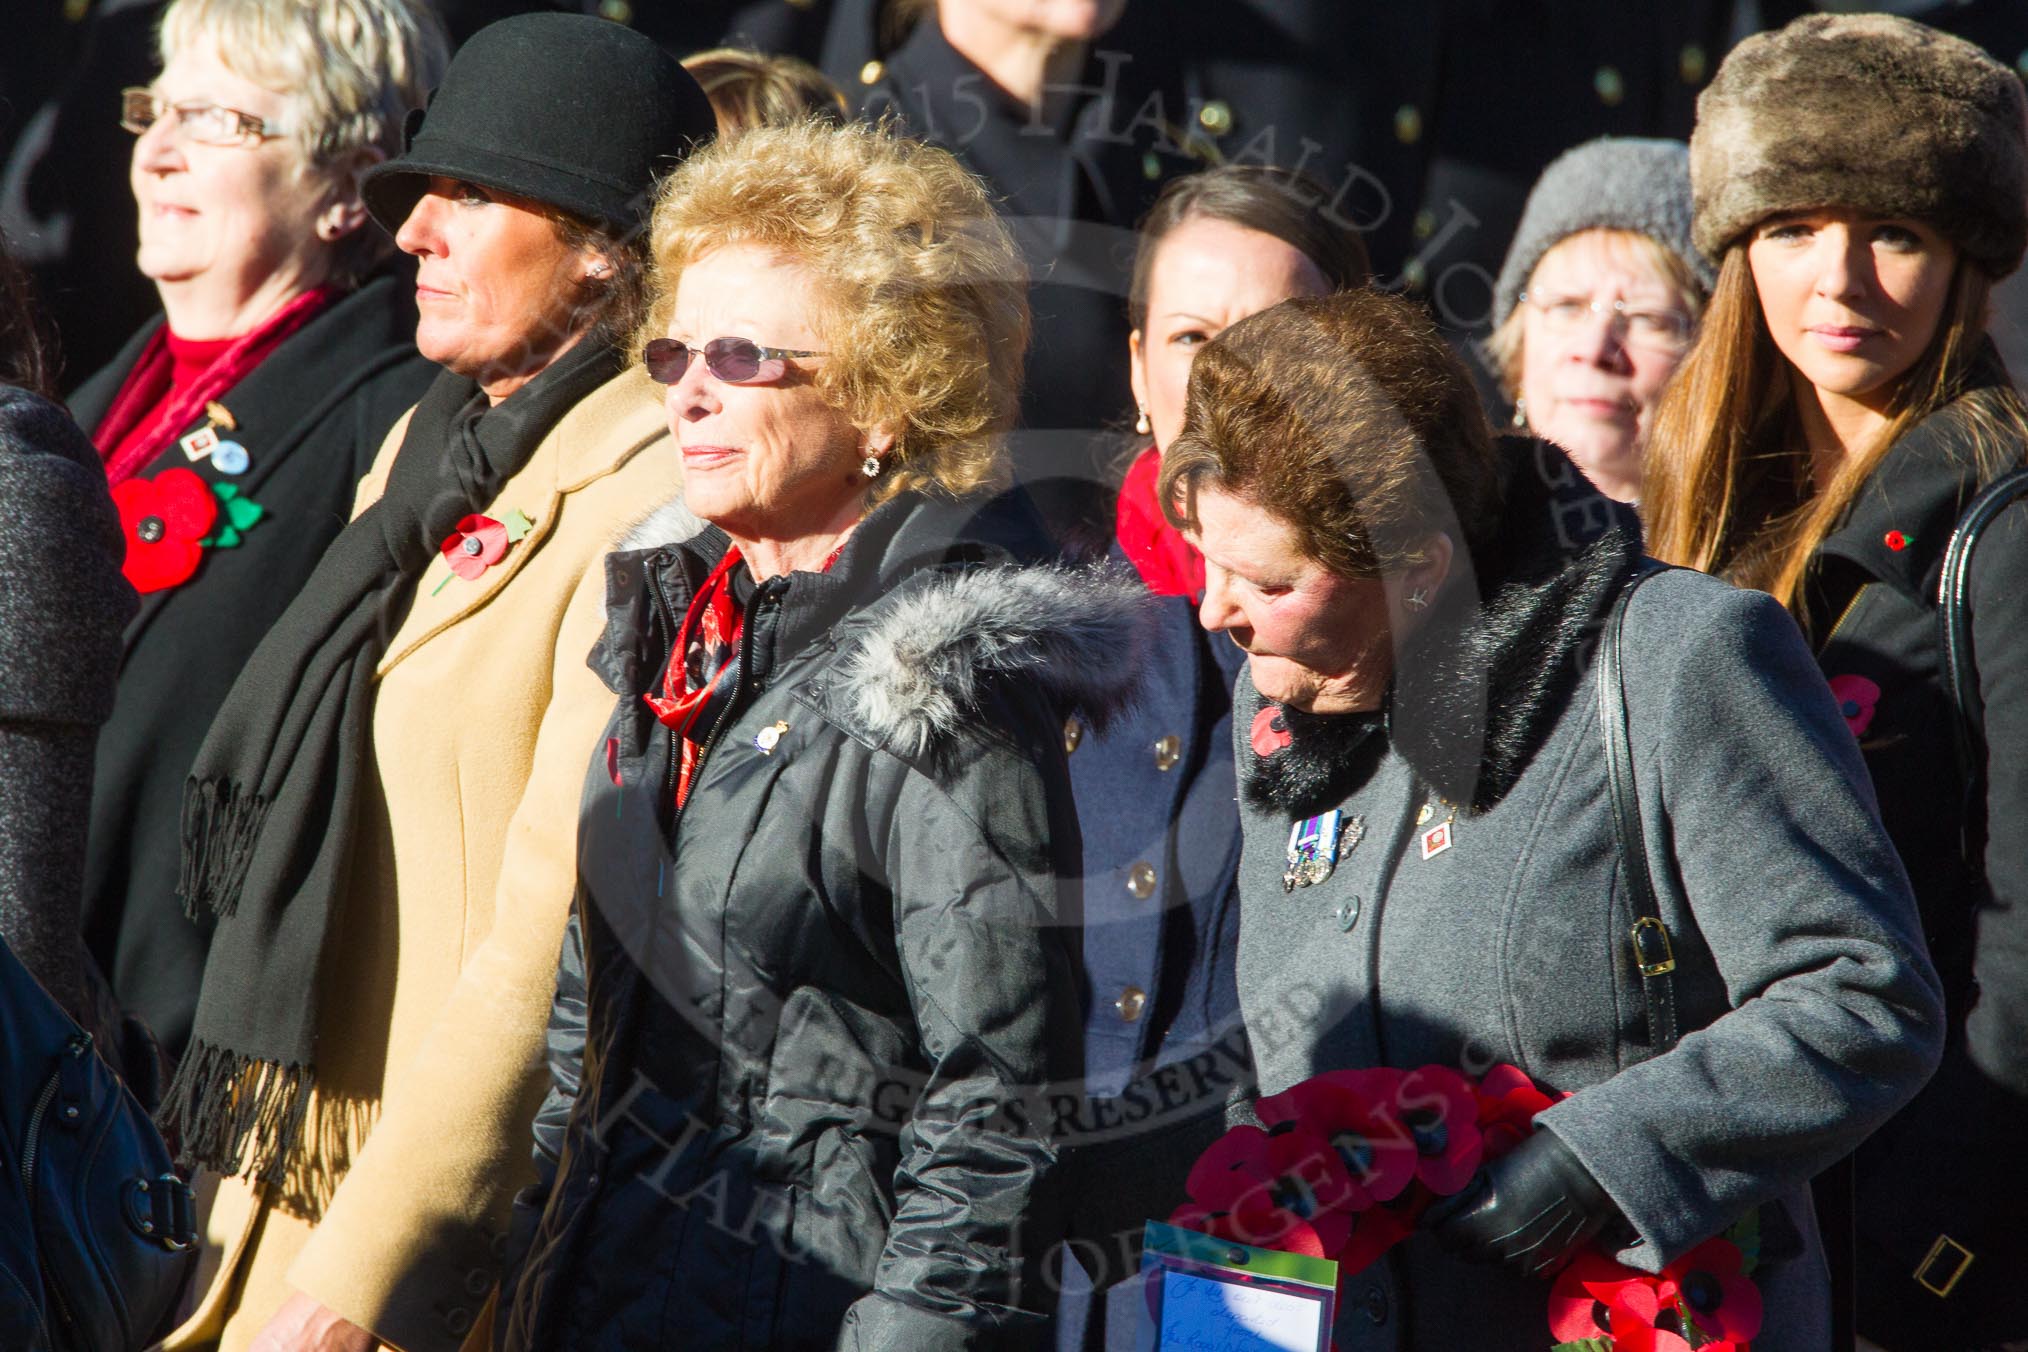 Remembrance Sunday Cenotaph March Past 2013: D1 - War Widows Association. The War Widows' Association exisits to improve the conditions of all War Widow/ers in the United Kingdom. The Association formed in 1971 following an article in a Sunday newspaper that highlighted the plight of Britain’s “forgotten women”. The Association gained charitable status in 1991 and continues to campaign against injustice..
Press stand opposite the Foreign Office building, Whitehall, London SW1,
London,
Greater London,
United Kingdom,
on 10 November 2013 at 11:38, image #28